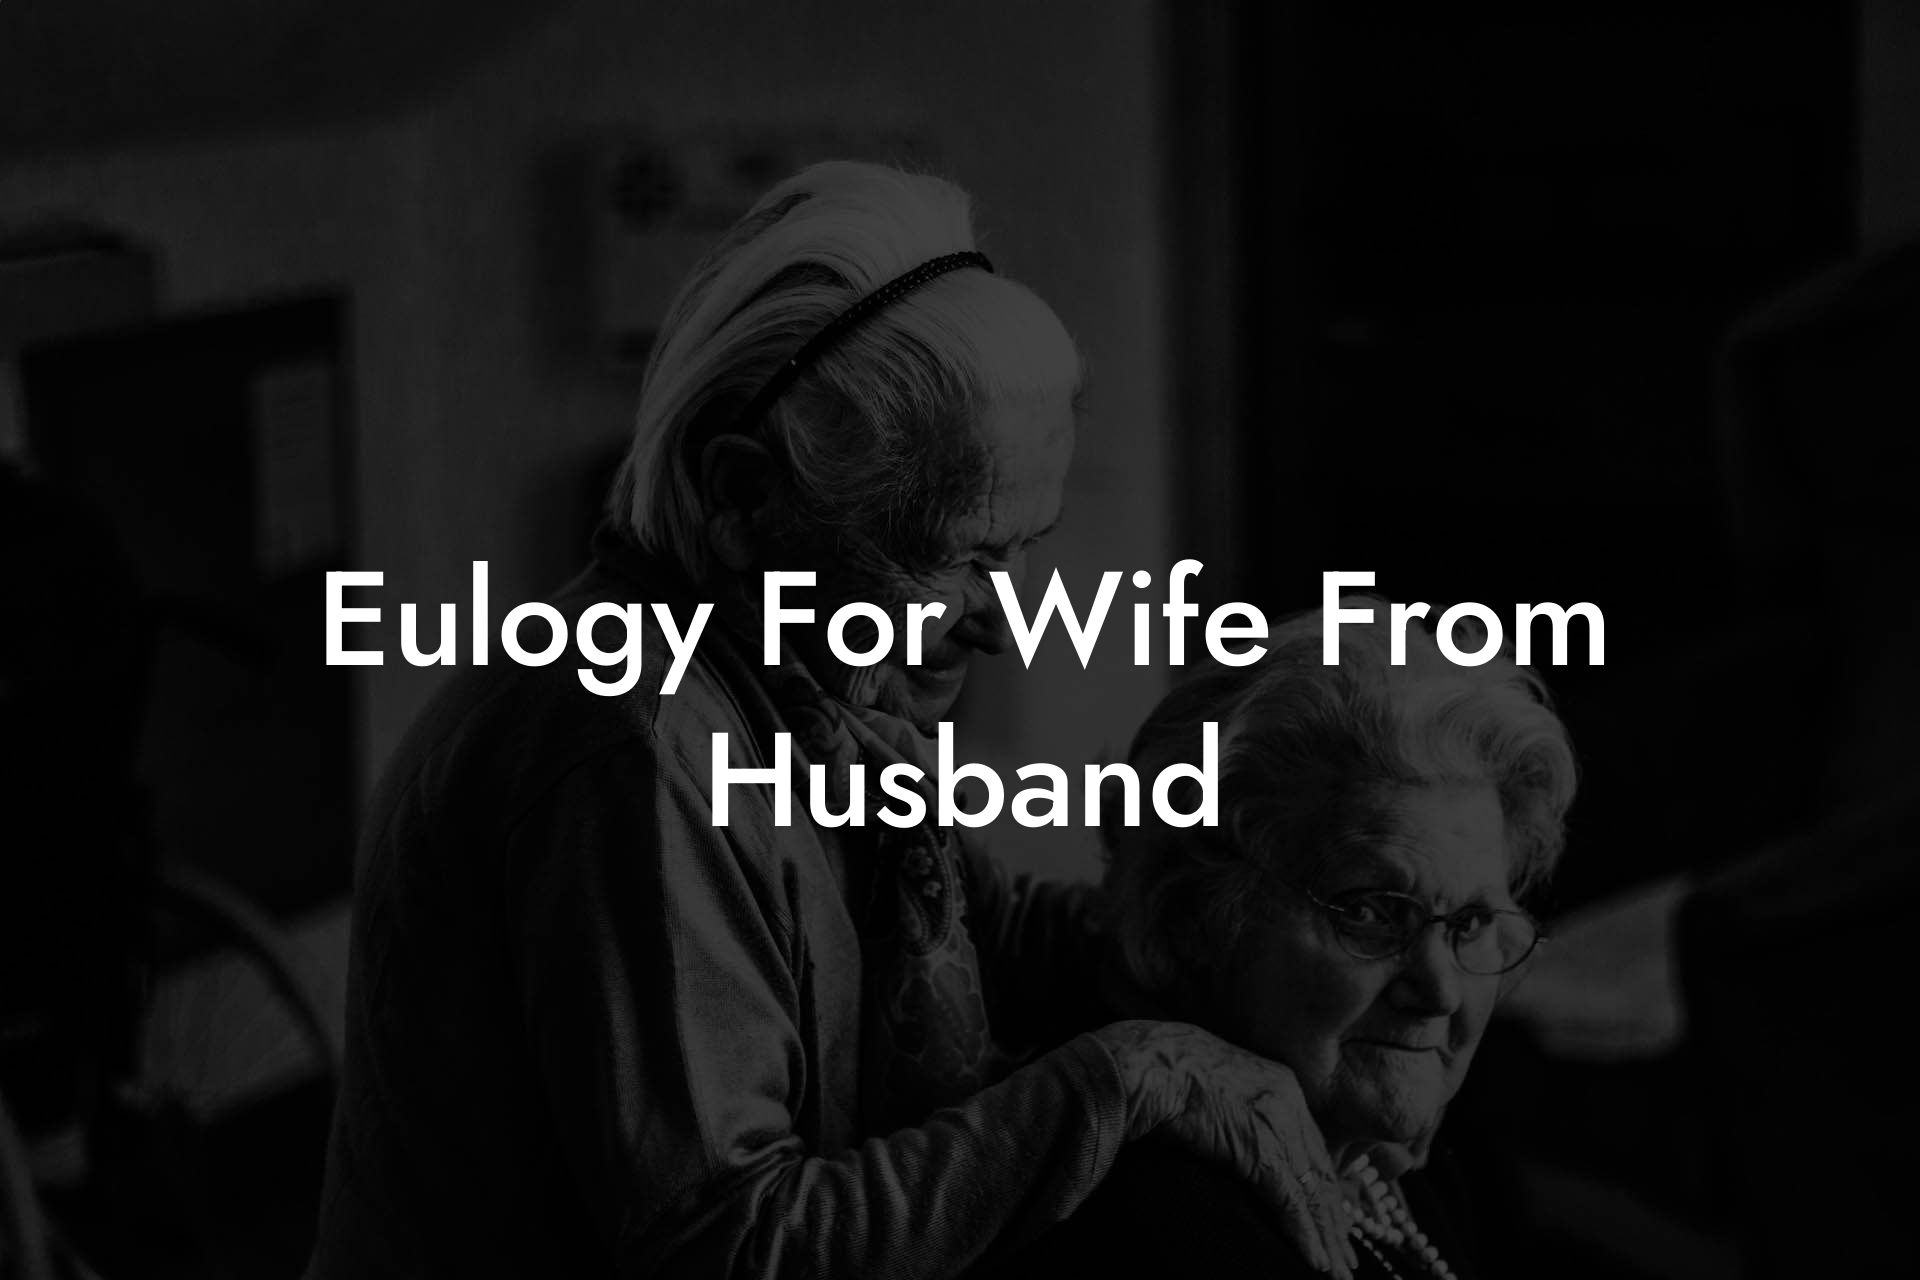 Eulogy For Wife From Husband